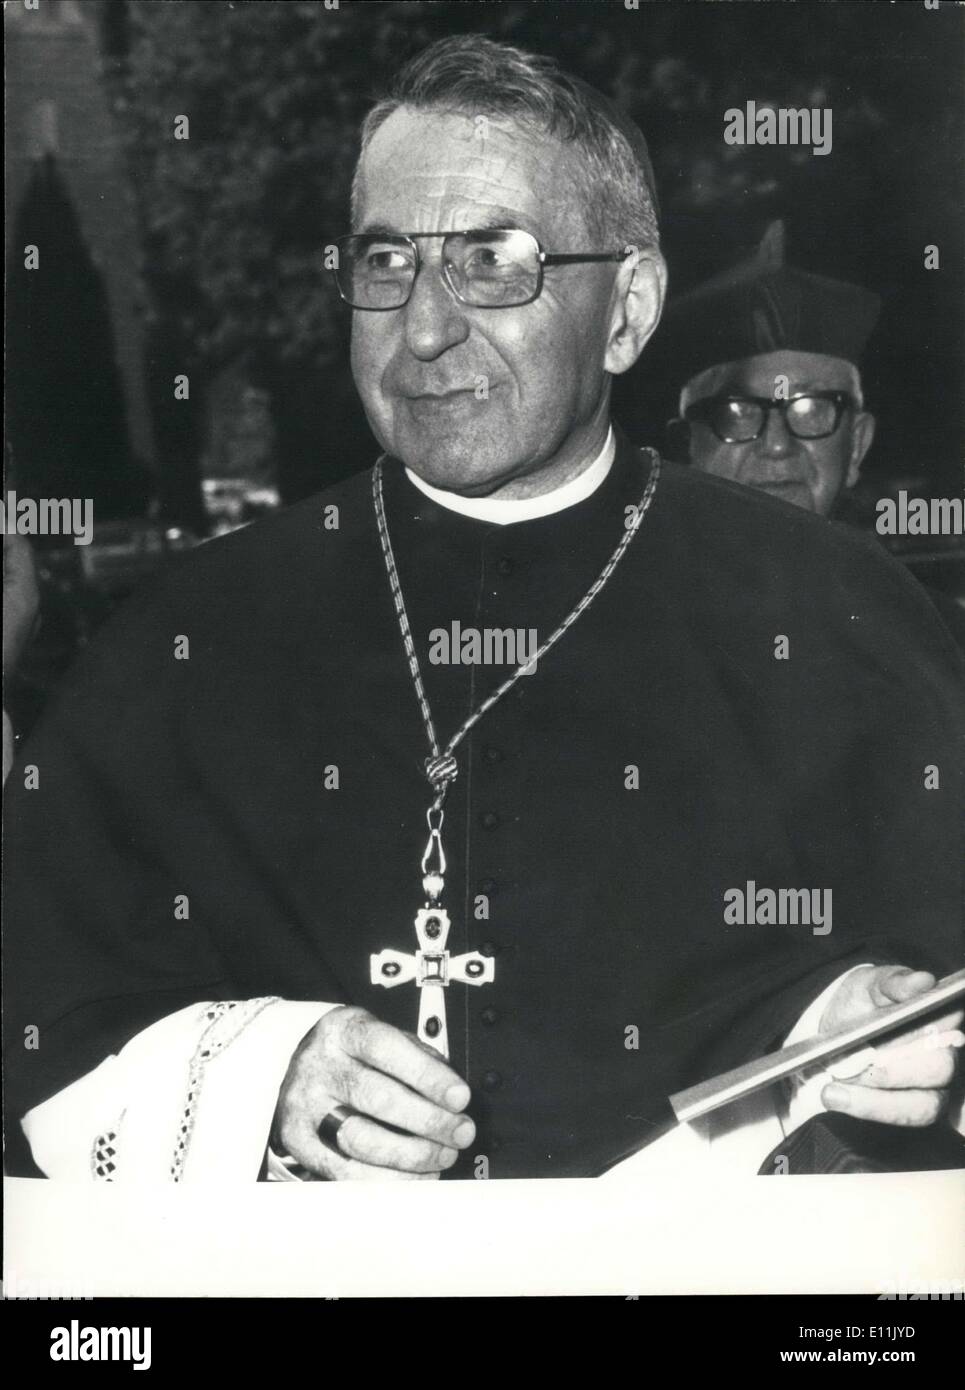 Aug. 28, 1978 - Mr. Albino Luciani (66), patriarch of Venice, was elected Pope on the first night of conclave at the Vatican. The 263rd successor of Saint-Pierre chose the name of Jean-Paul the First. Stock Photo